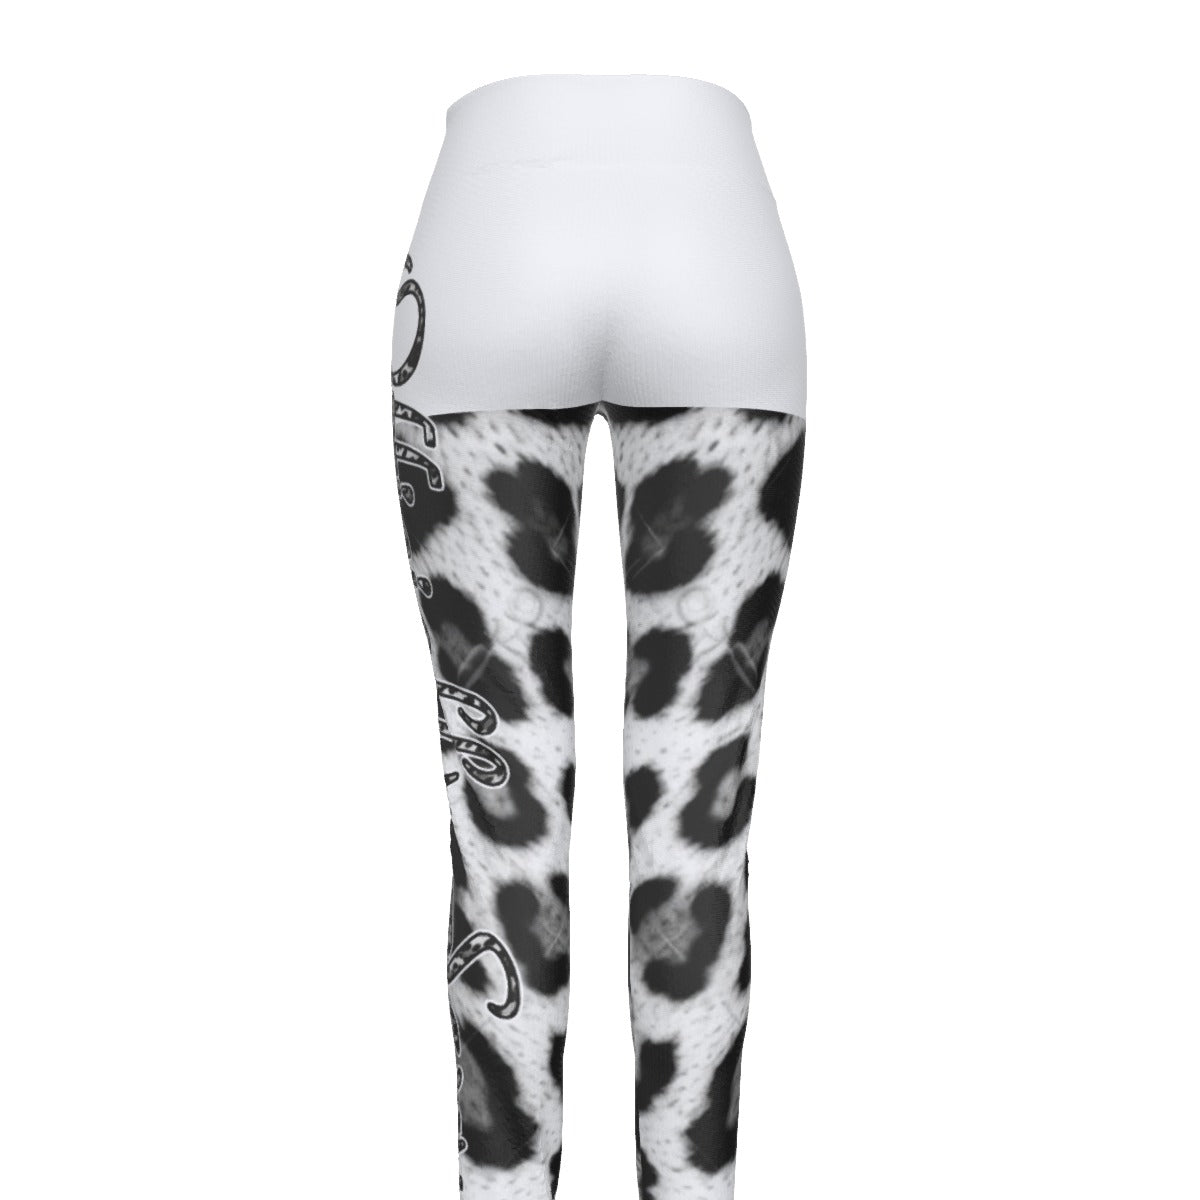 Officially Sexy Snow Leopard Print Collection Women's White High Waist Booty Popper Leggings #2 (English) 3